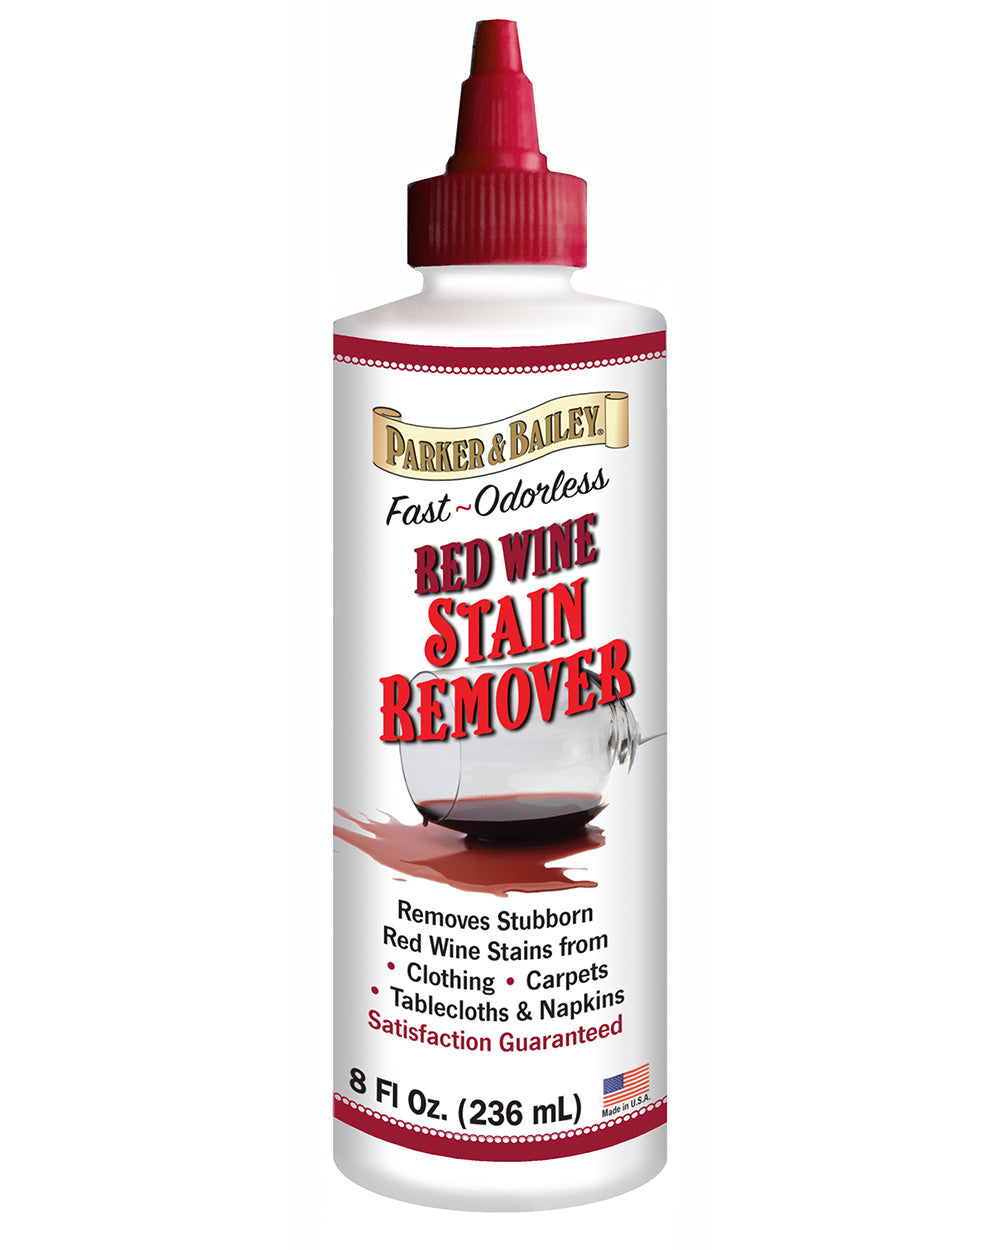 red wine stain remover tough stain remover carpet clothes upholstery Parker & Bailey on a white back ground